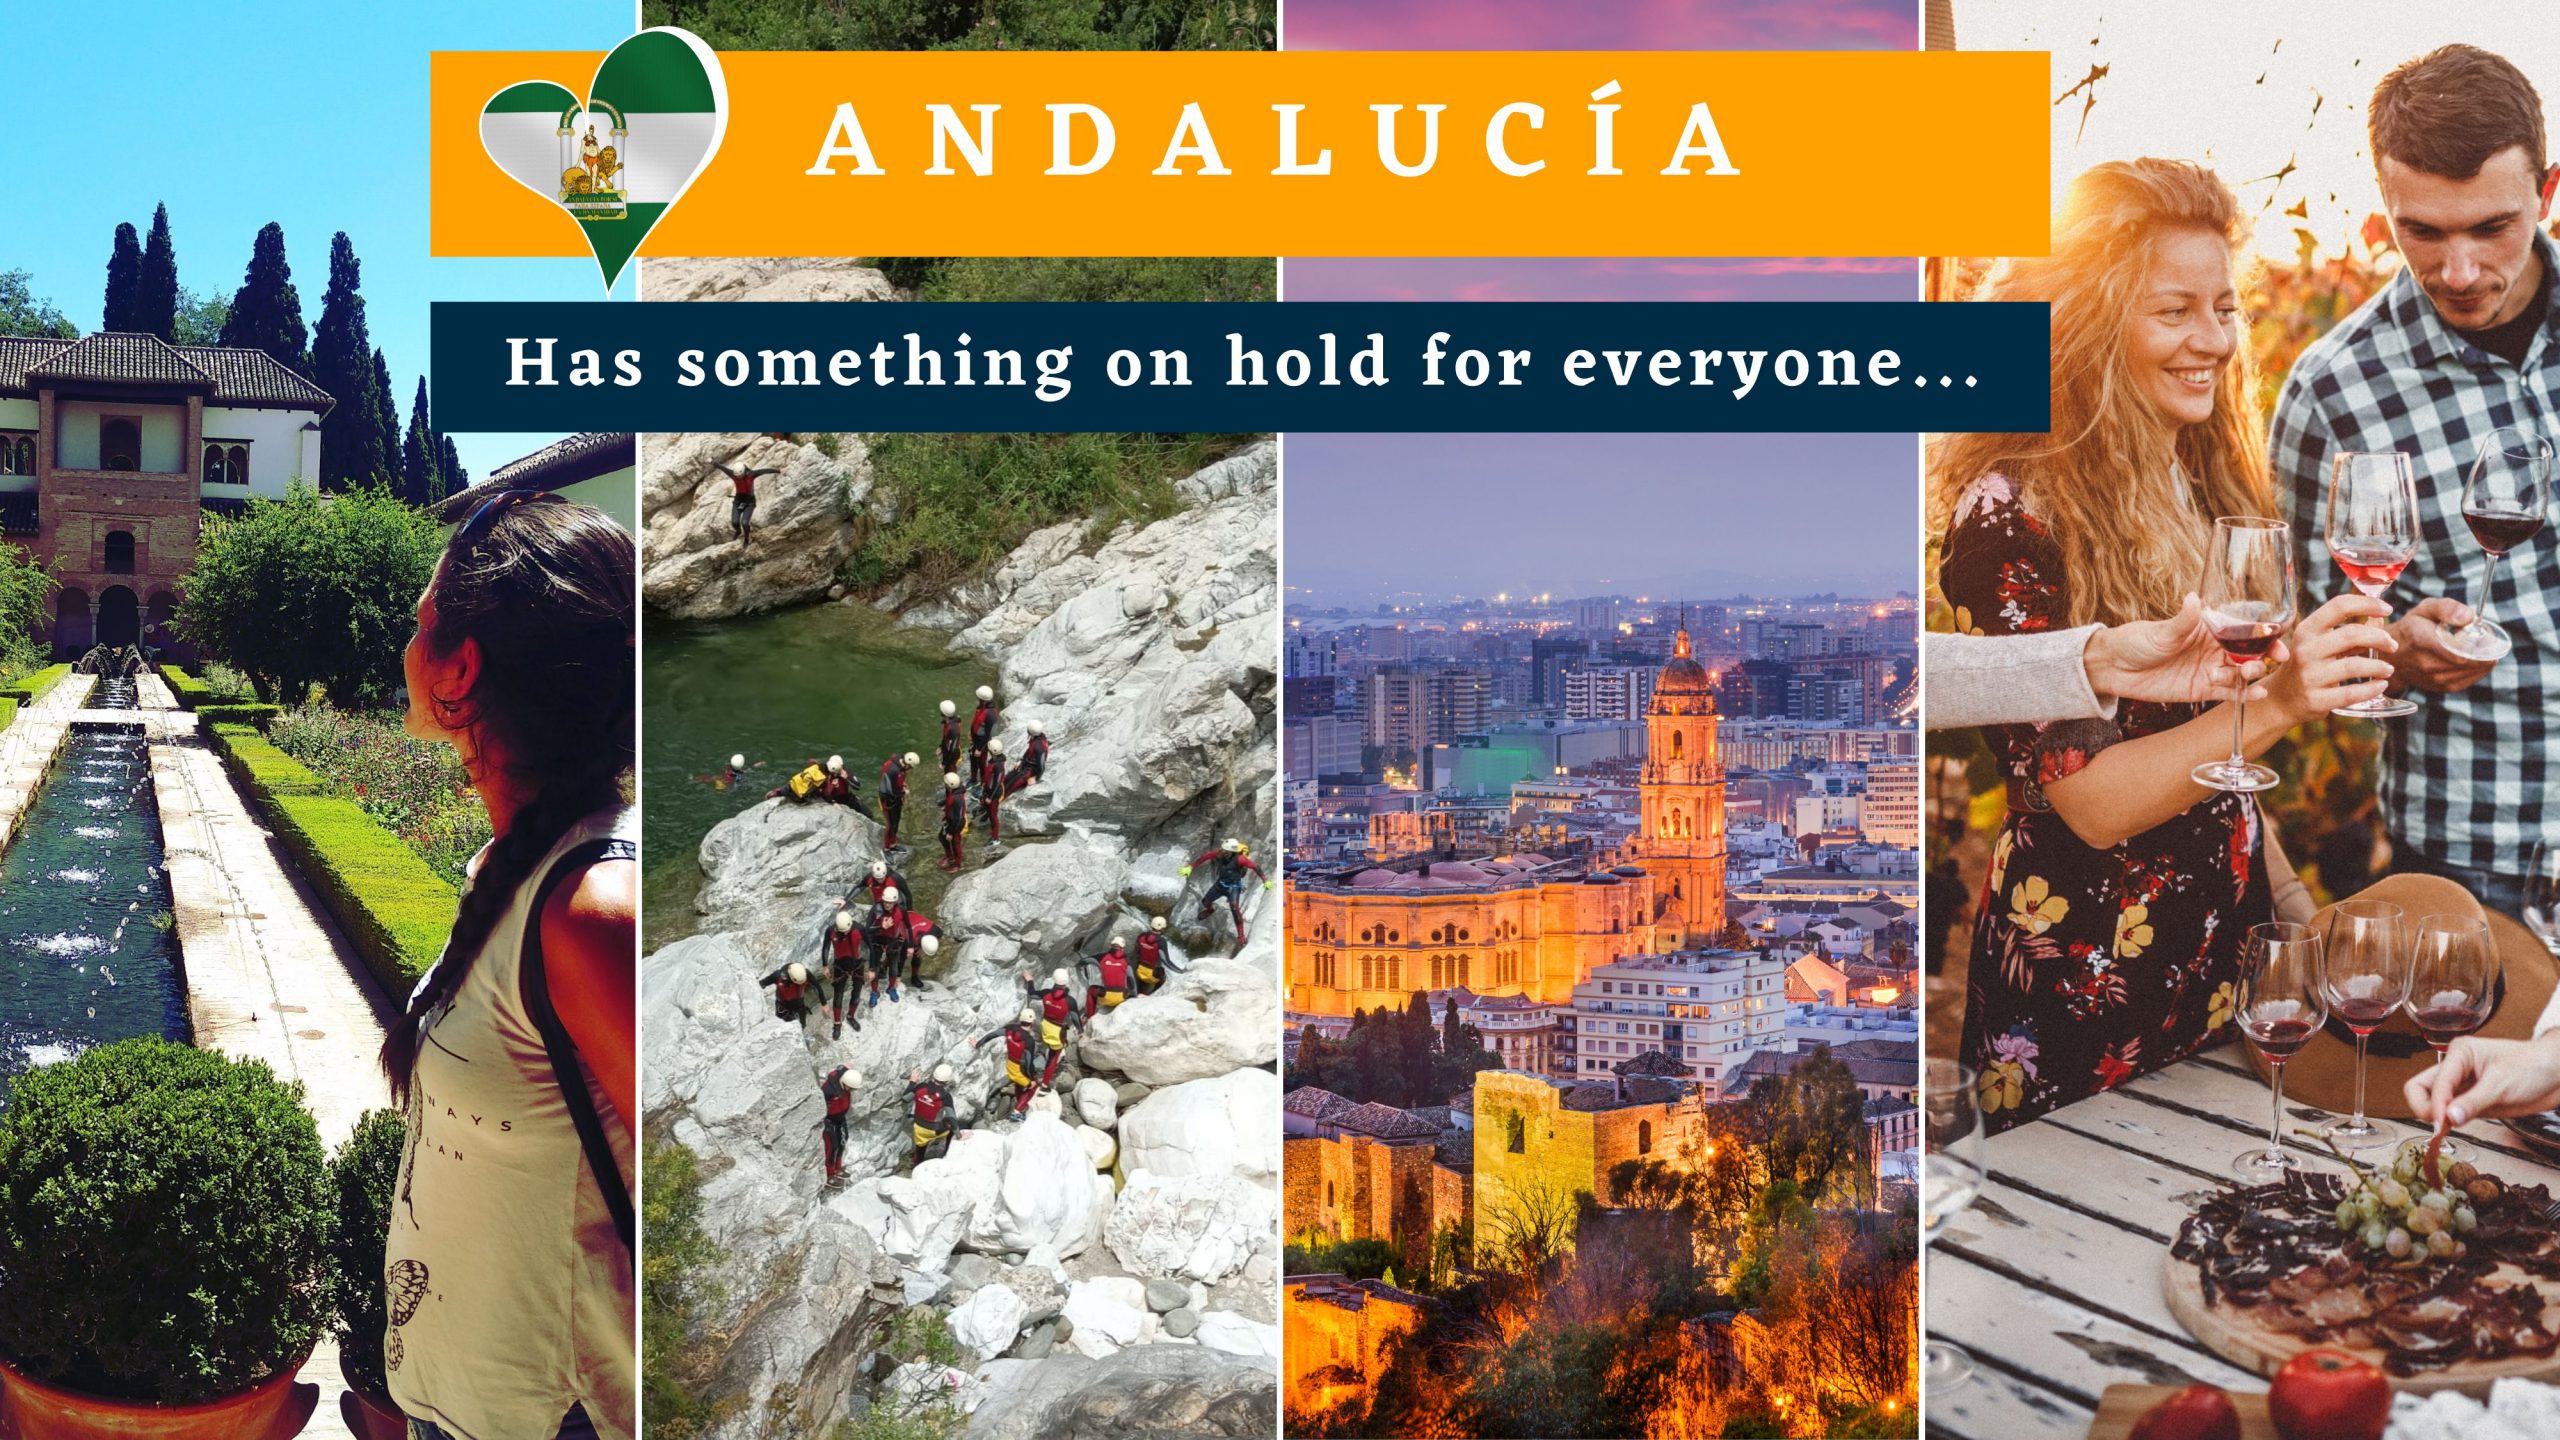 Andalucía has something on hold for everyone!